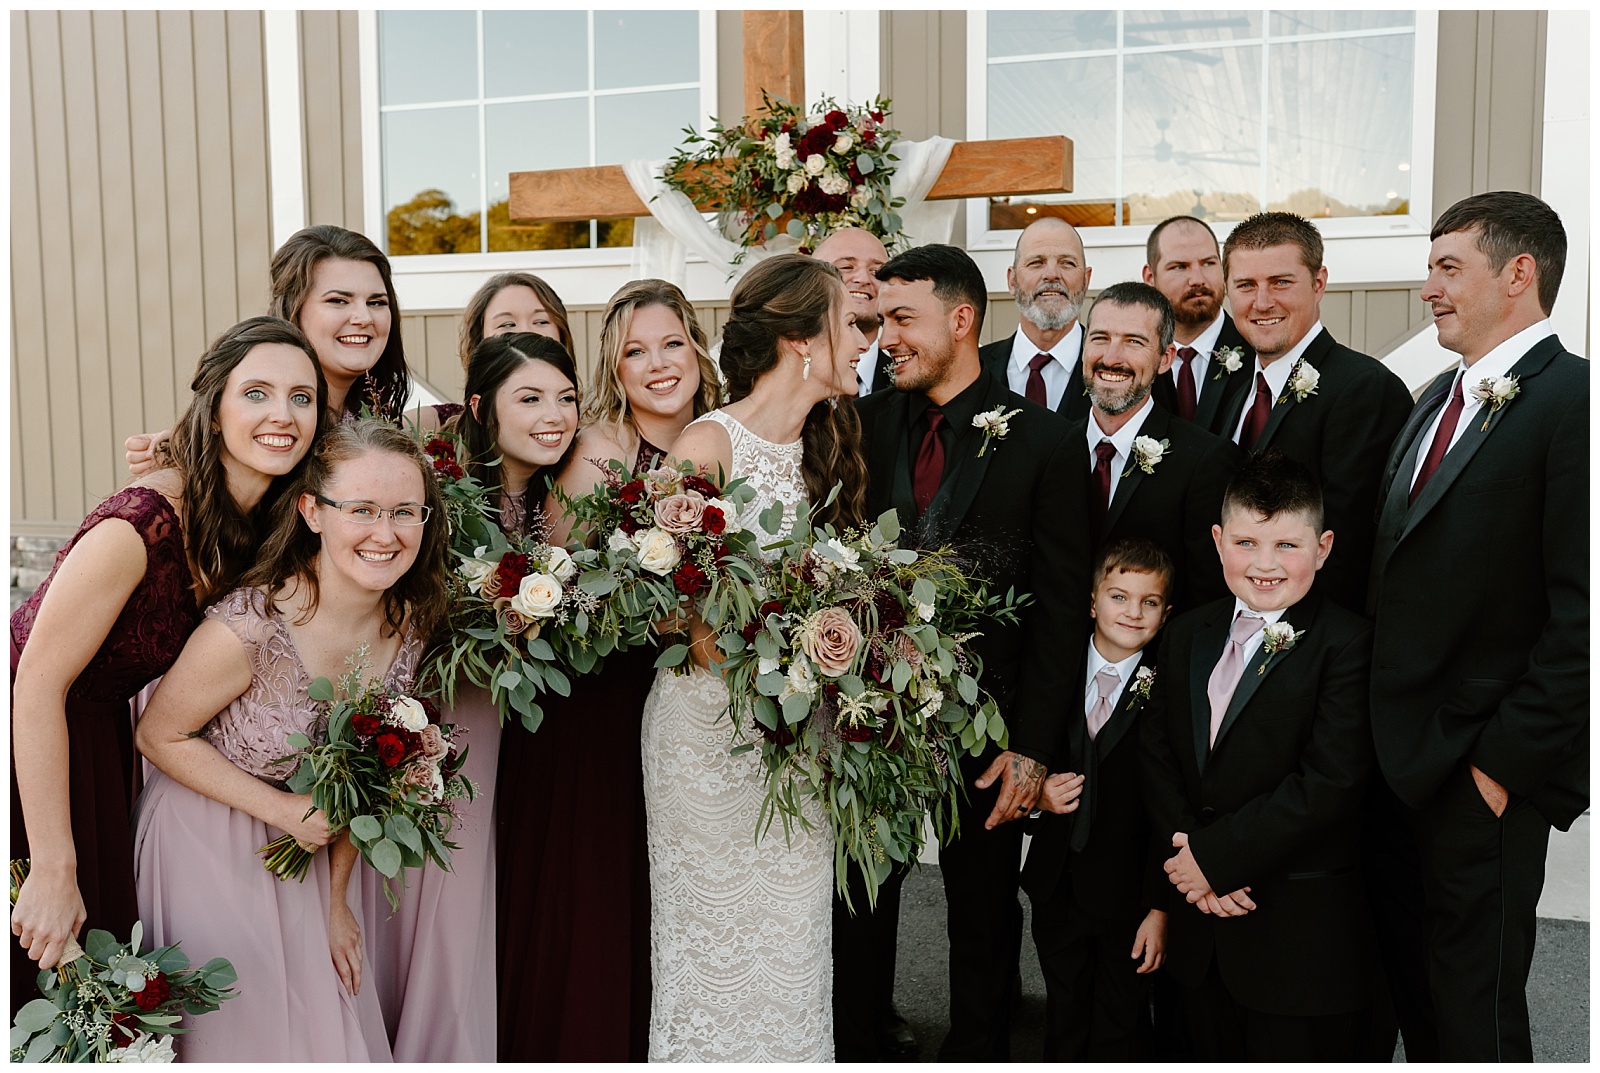 Close up image of whole wedding party laughing and smiling while bride and groom look at each other